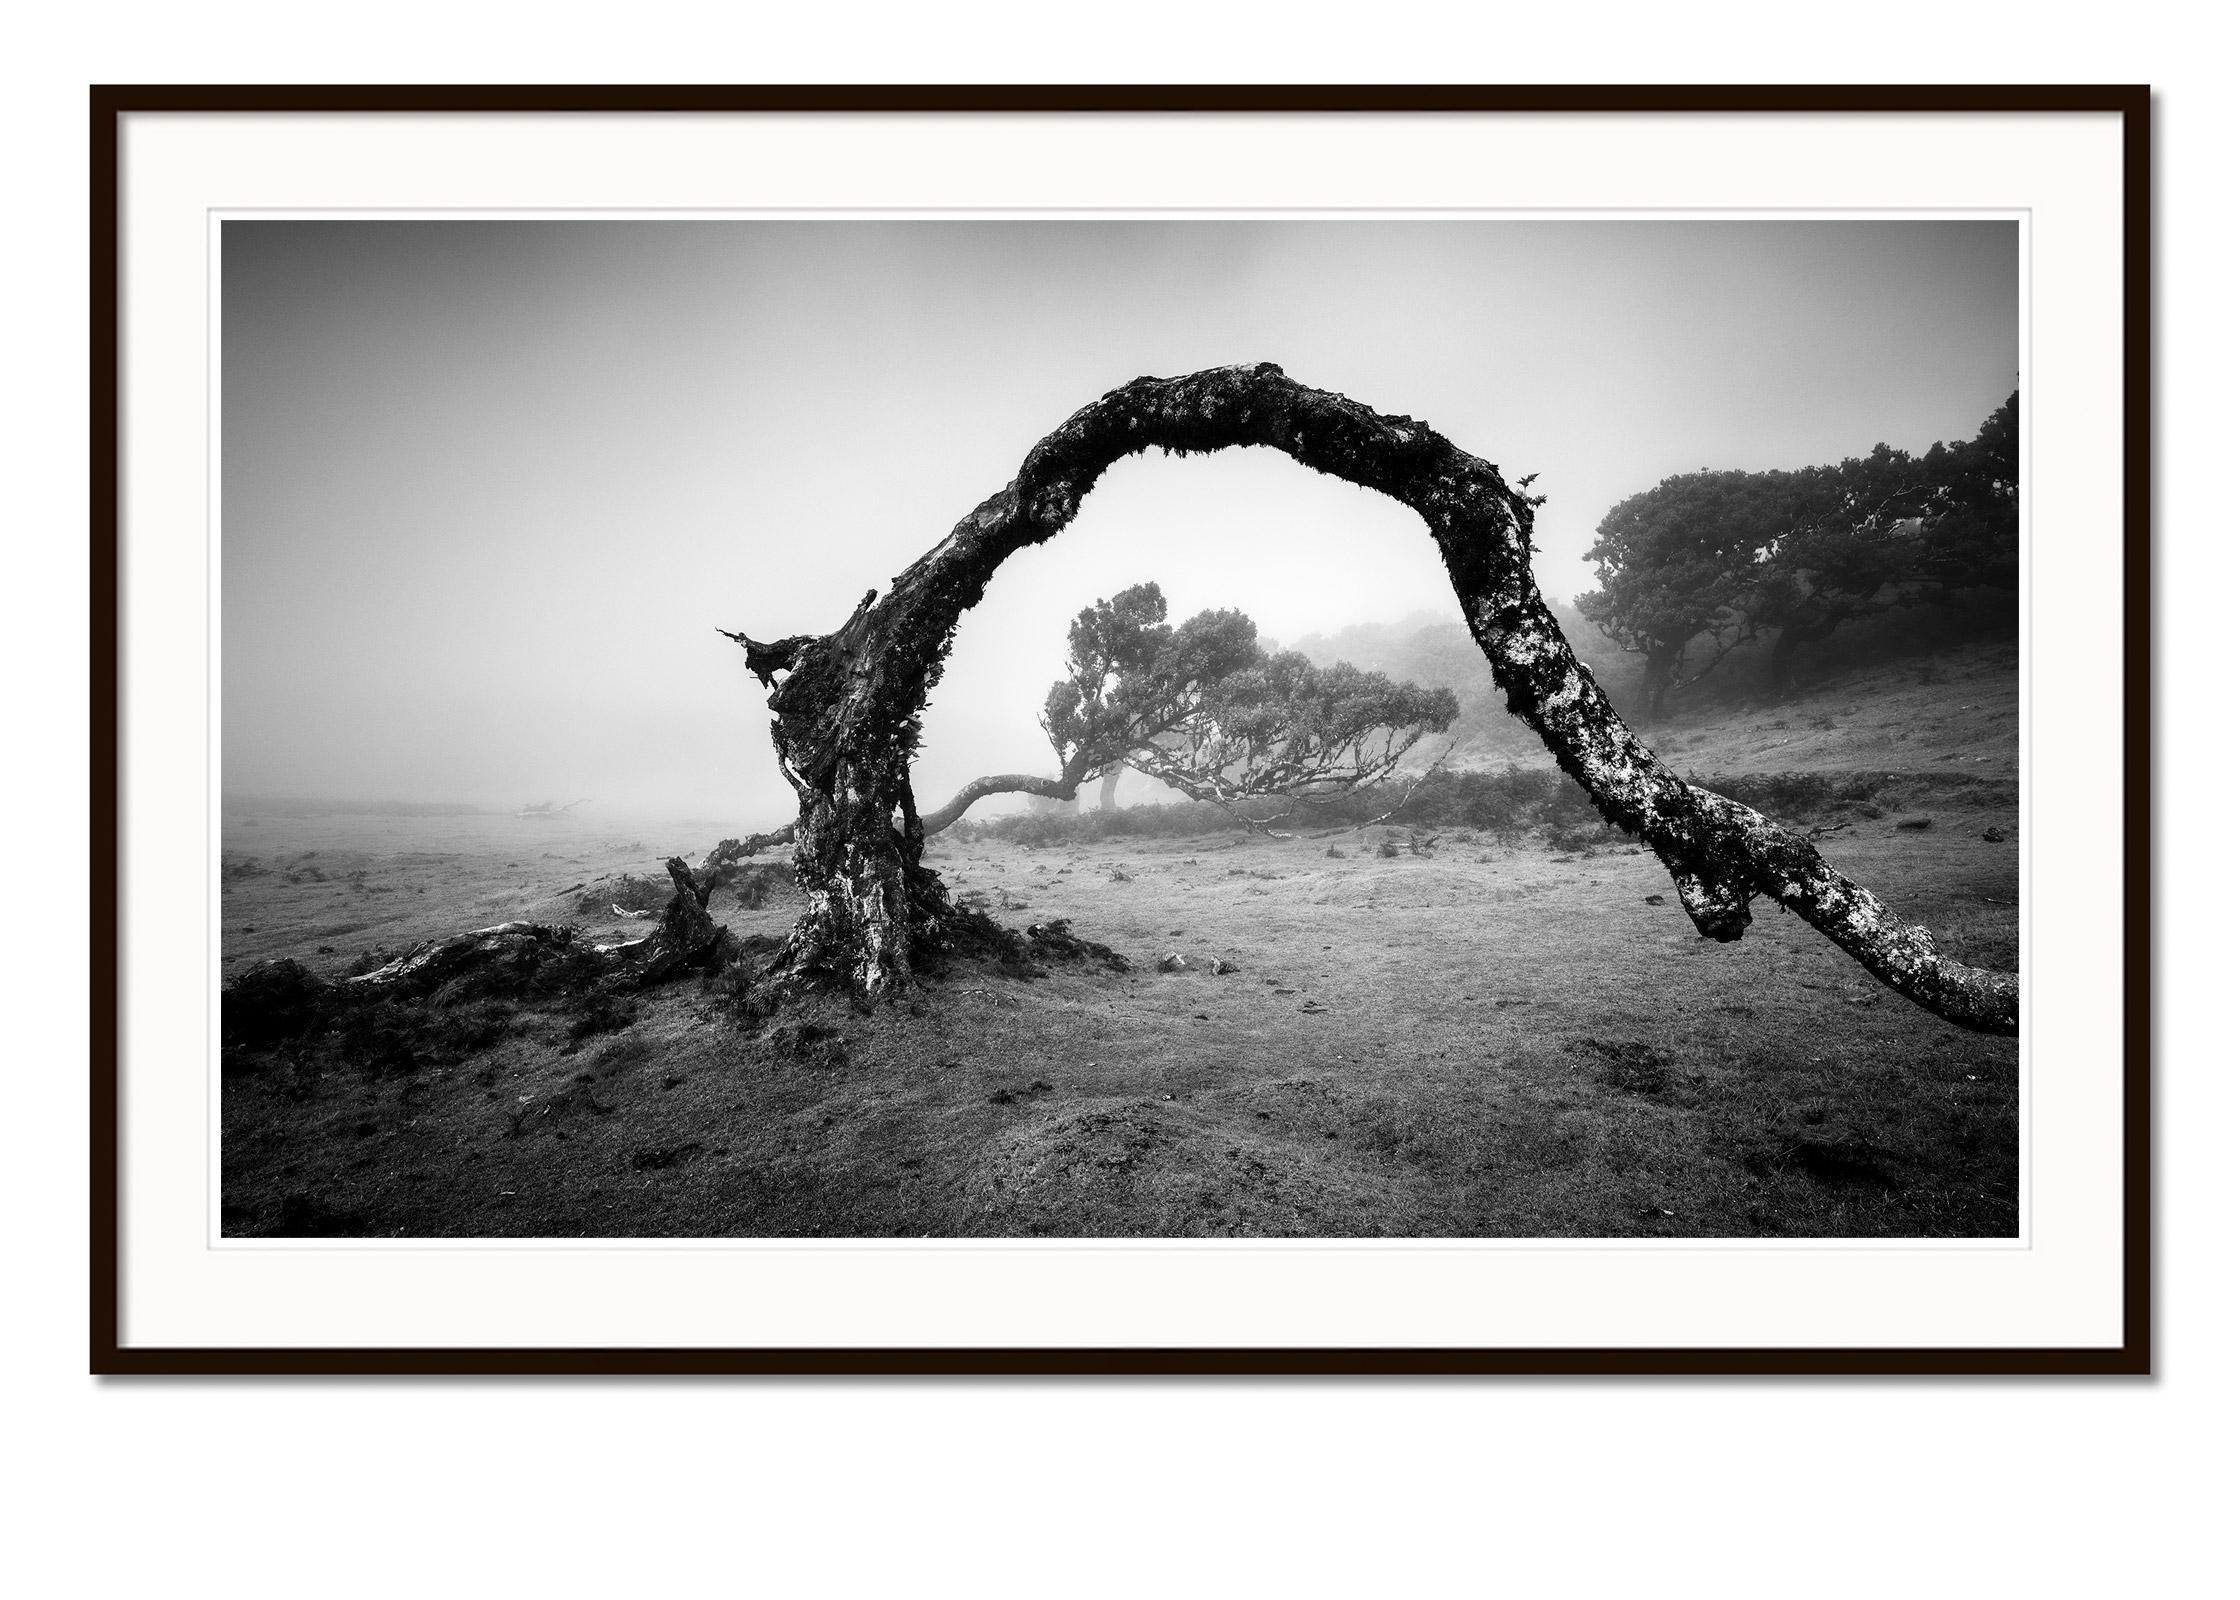 Bent Tree in the fog, Madeira, black and white panorama landscape photography - Contemporary Photograph by Gerald Berghammer